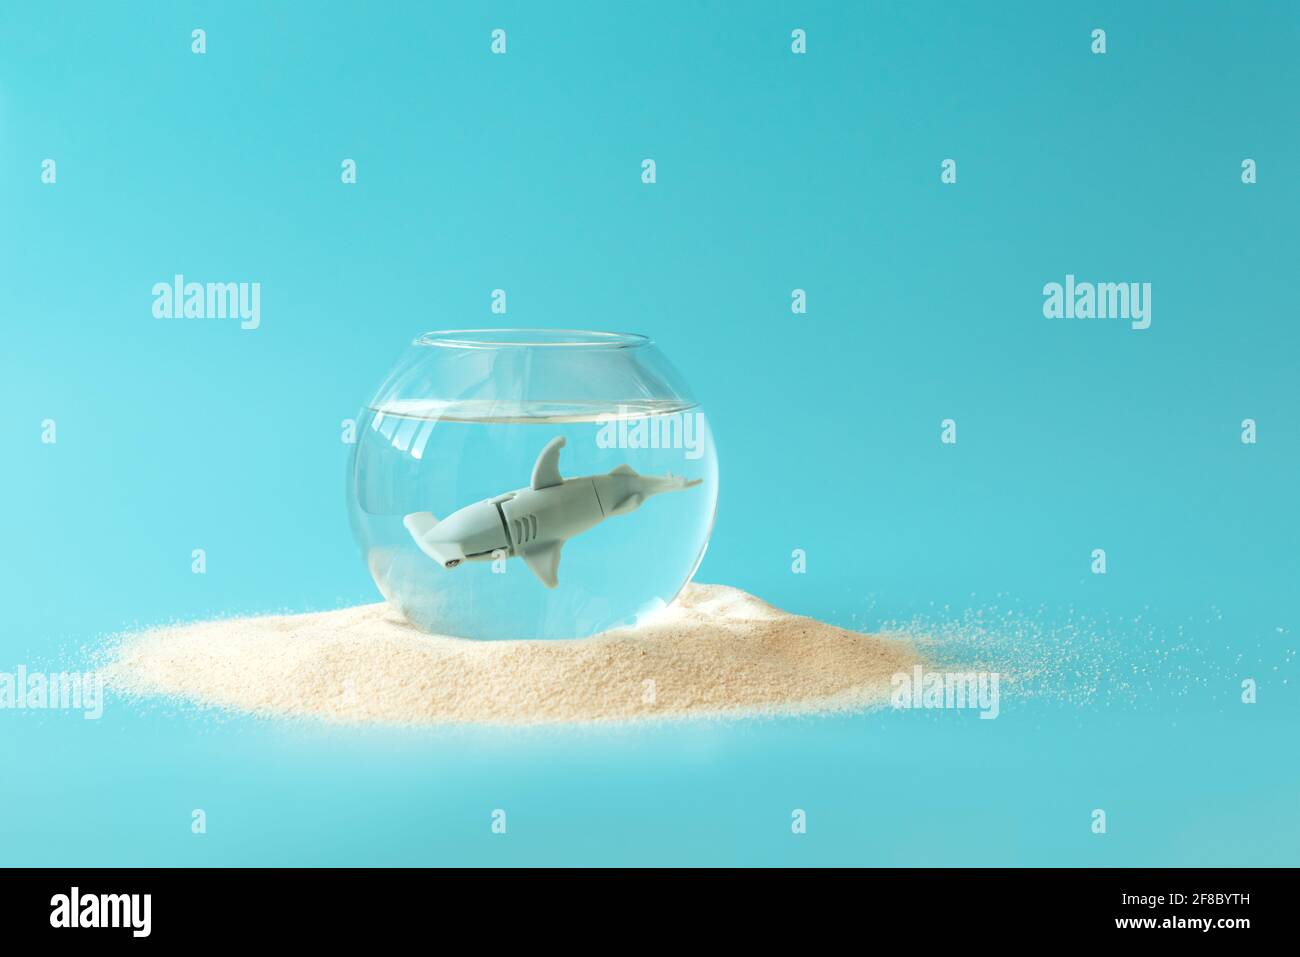 Aquarium with shark toy on blue background.  Creative summer vacation on dangerous concept Stock Photo